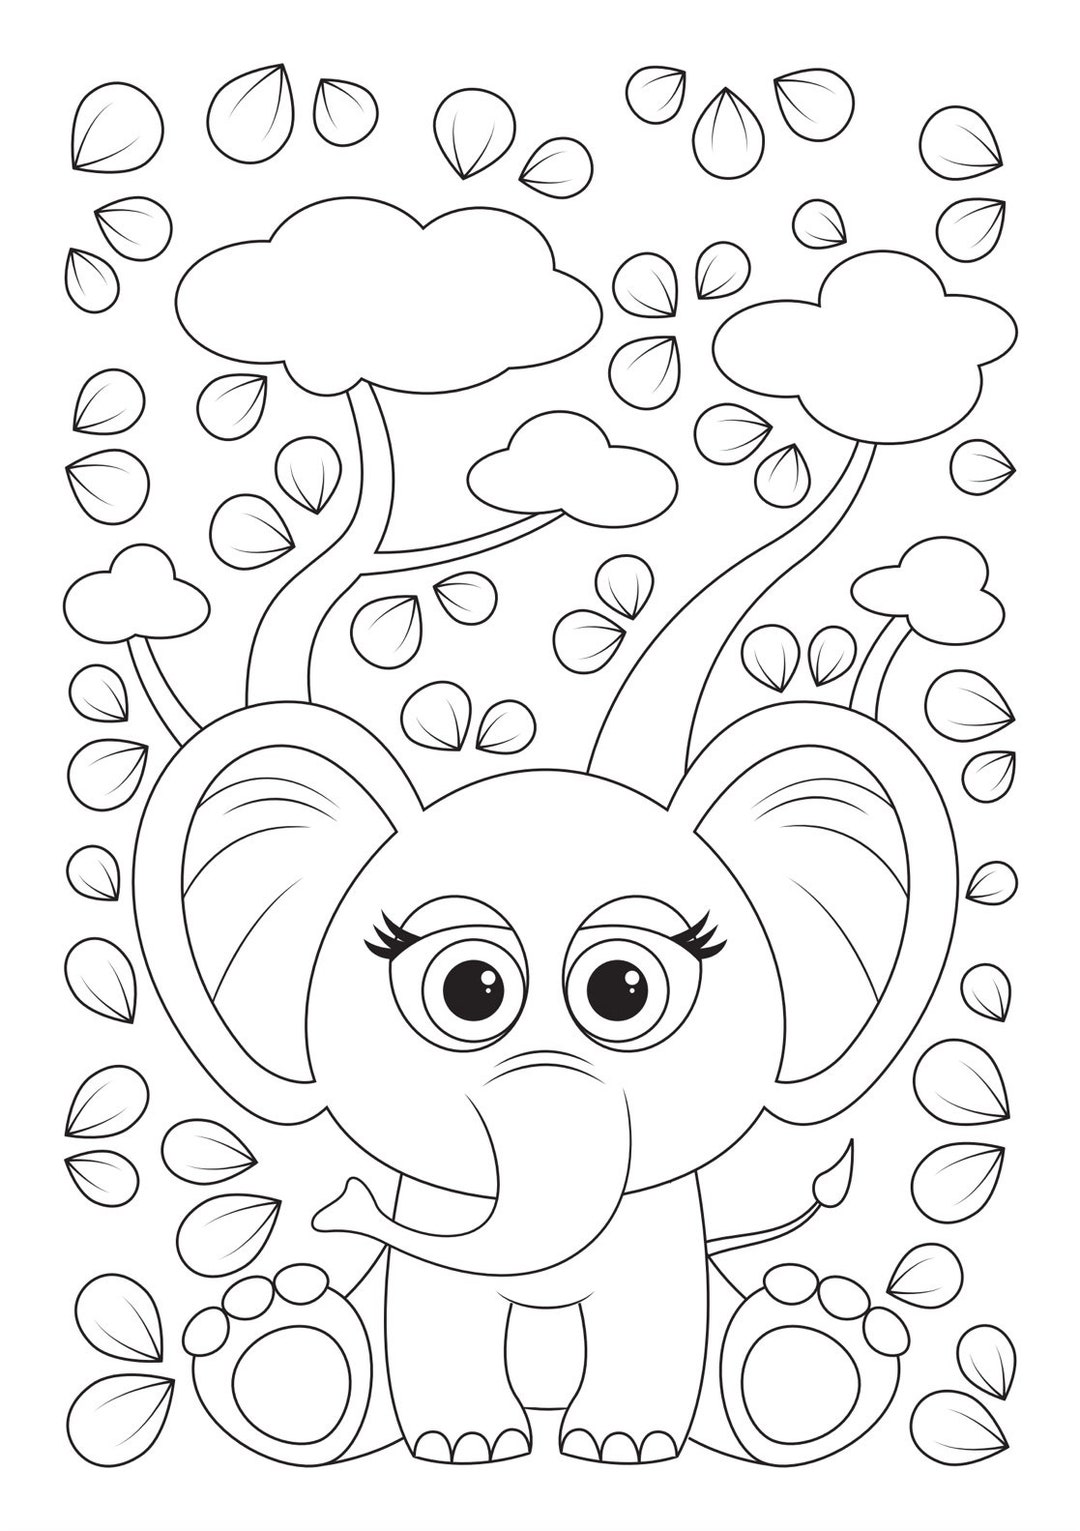 Doodle Art Cute Coloring Books for Adults and Girls: The Really Best  Relaxing Colouring Book For Girls 2017 (Cute, Animal, Dog, Cat, Elephant,  Rabbit, Owls, Bears, Kids Coloring Books Ages 2-4, 4-8